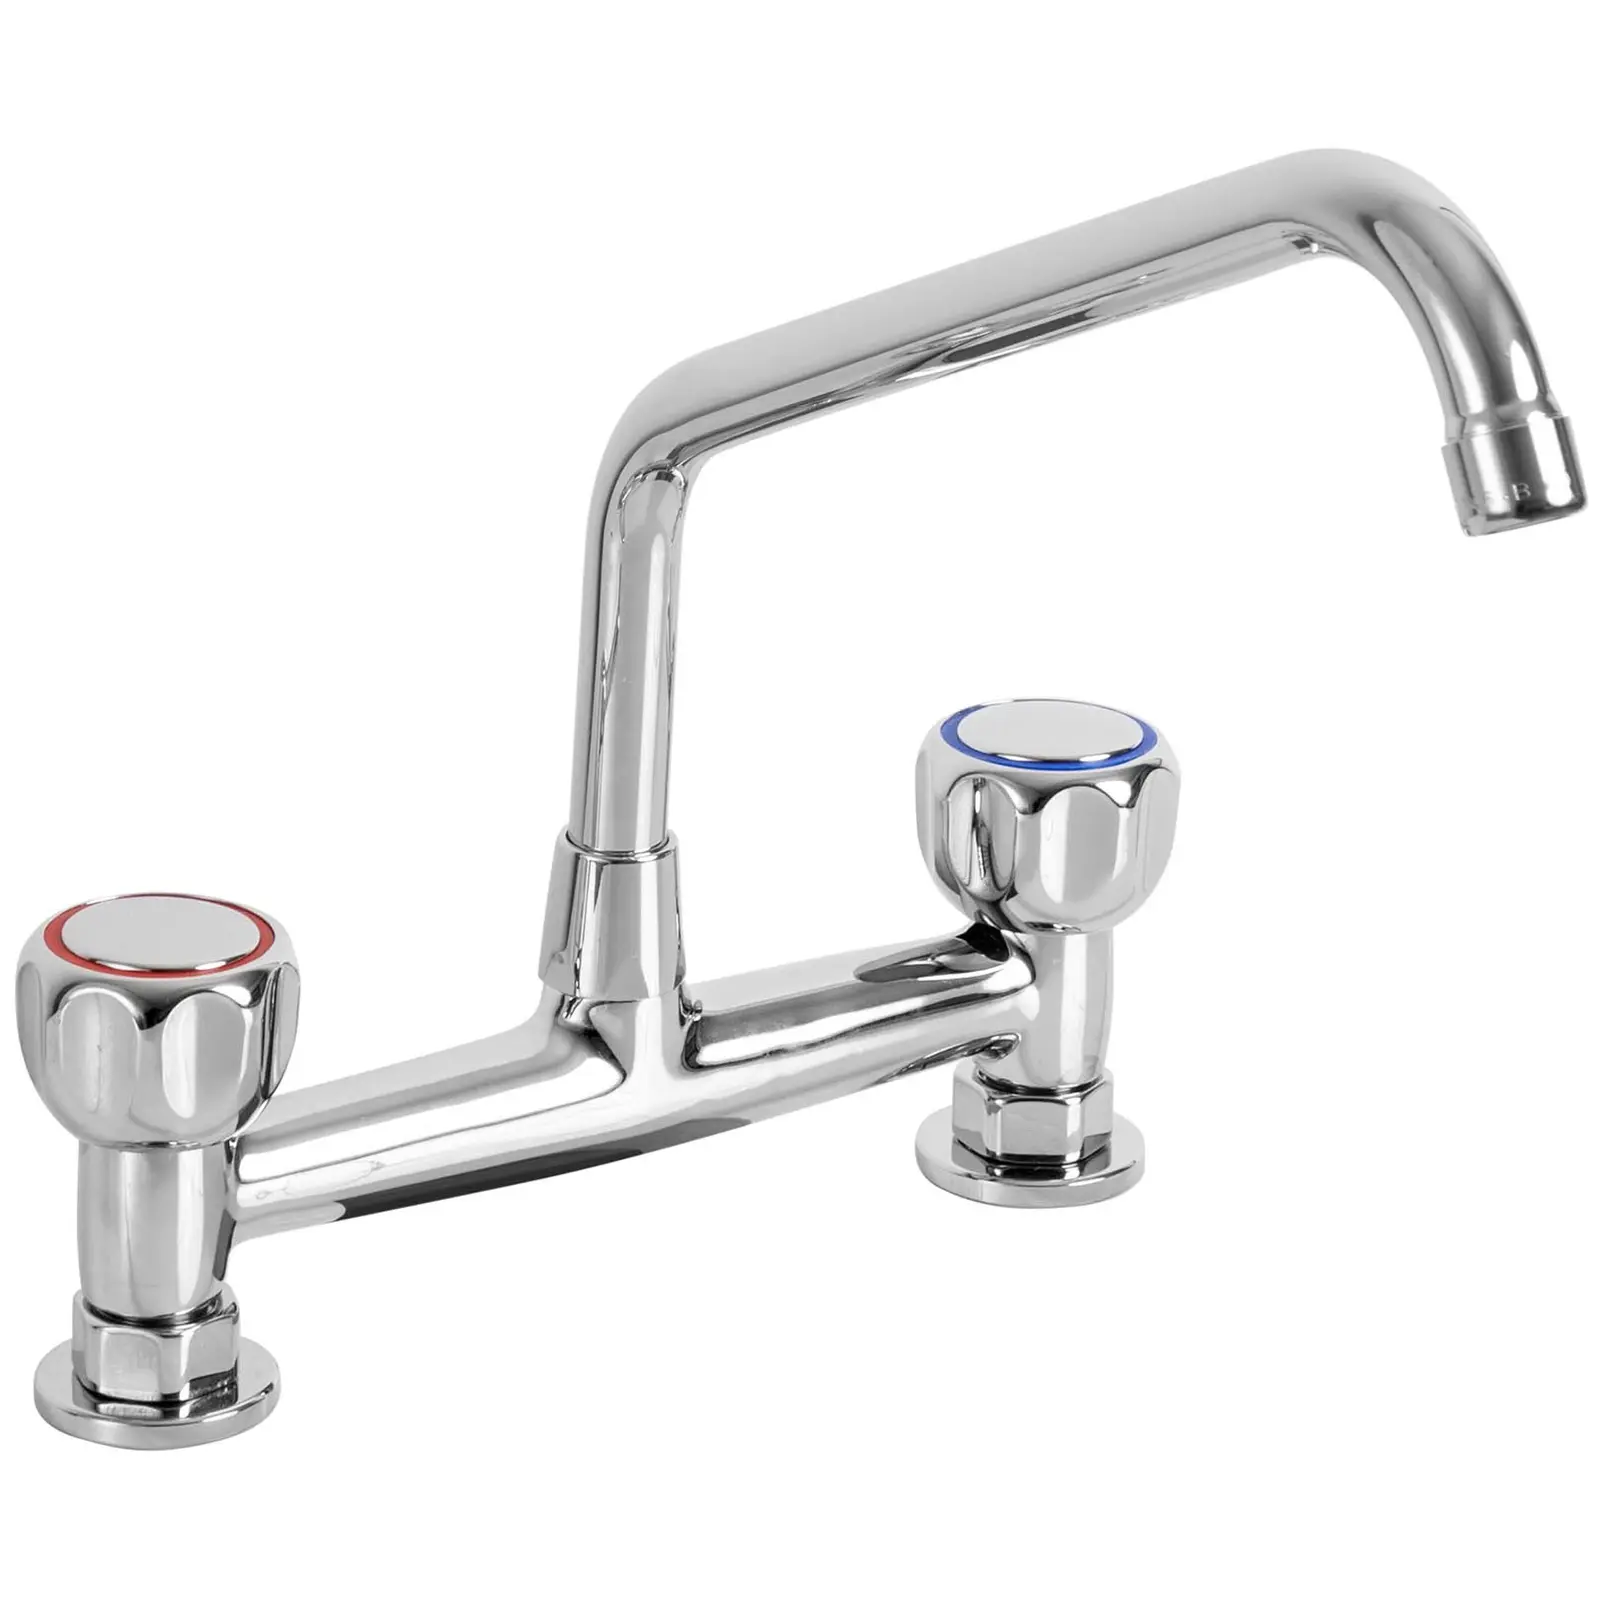 sink tap - Wall fitting - Chrome-plated brass